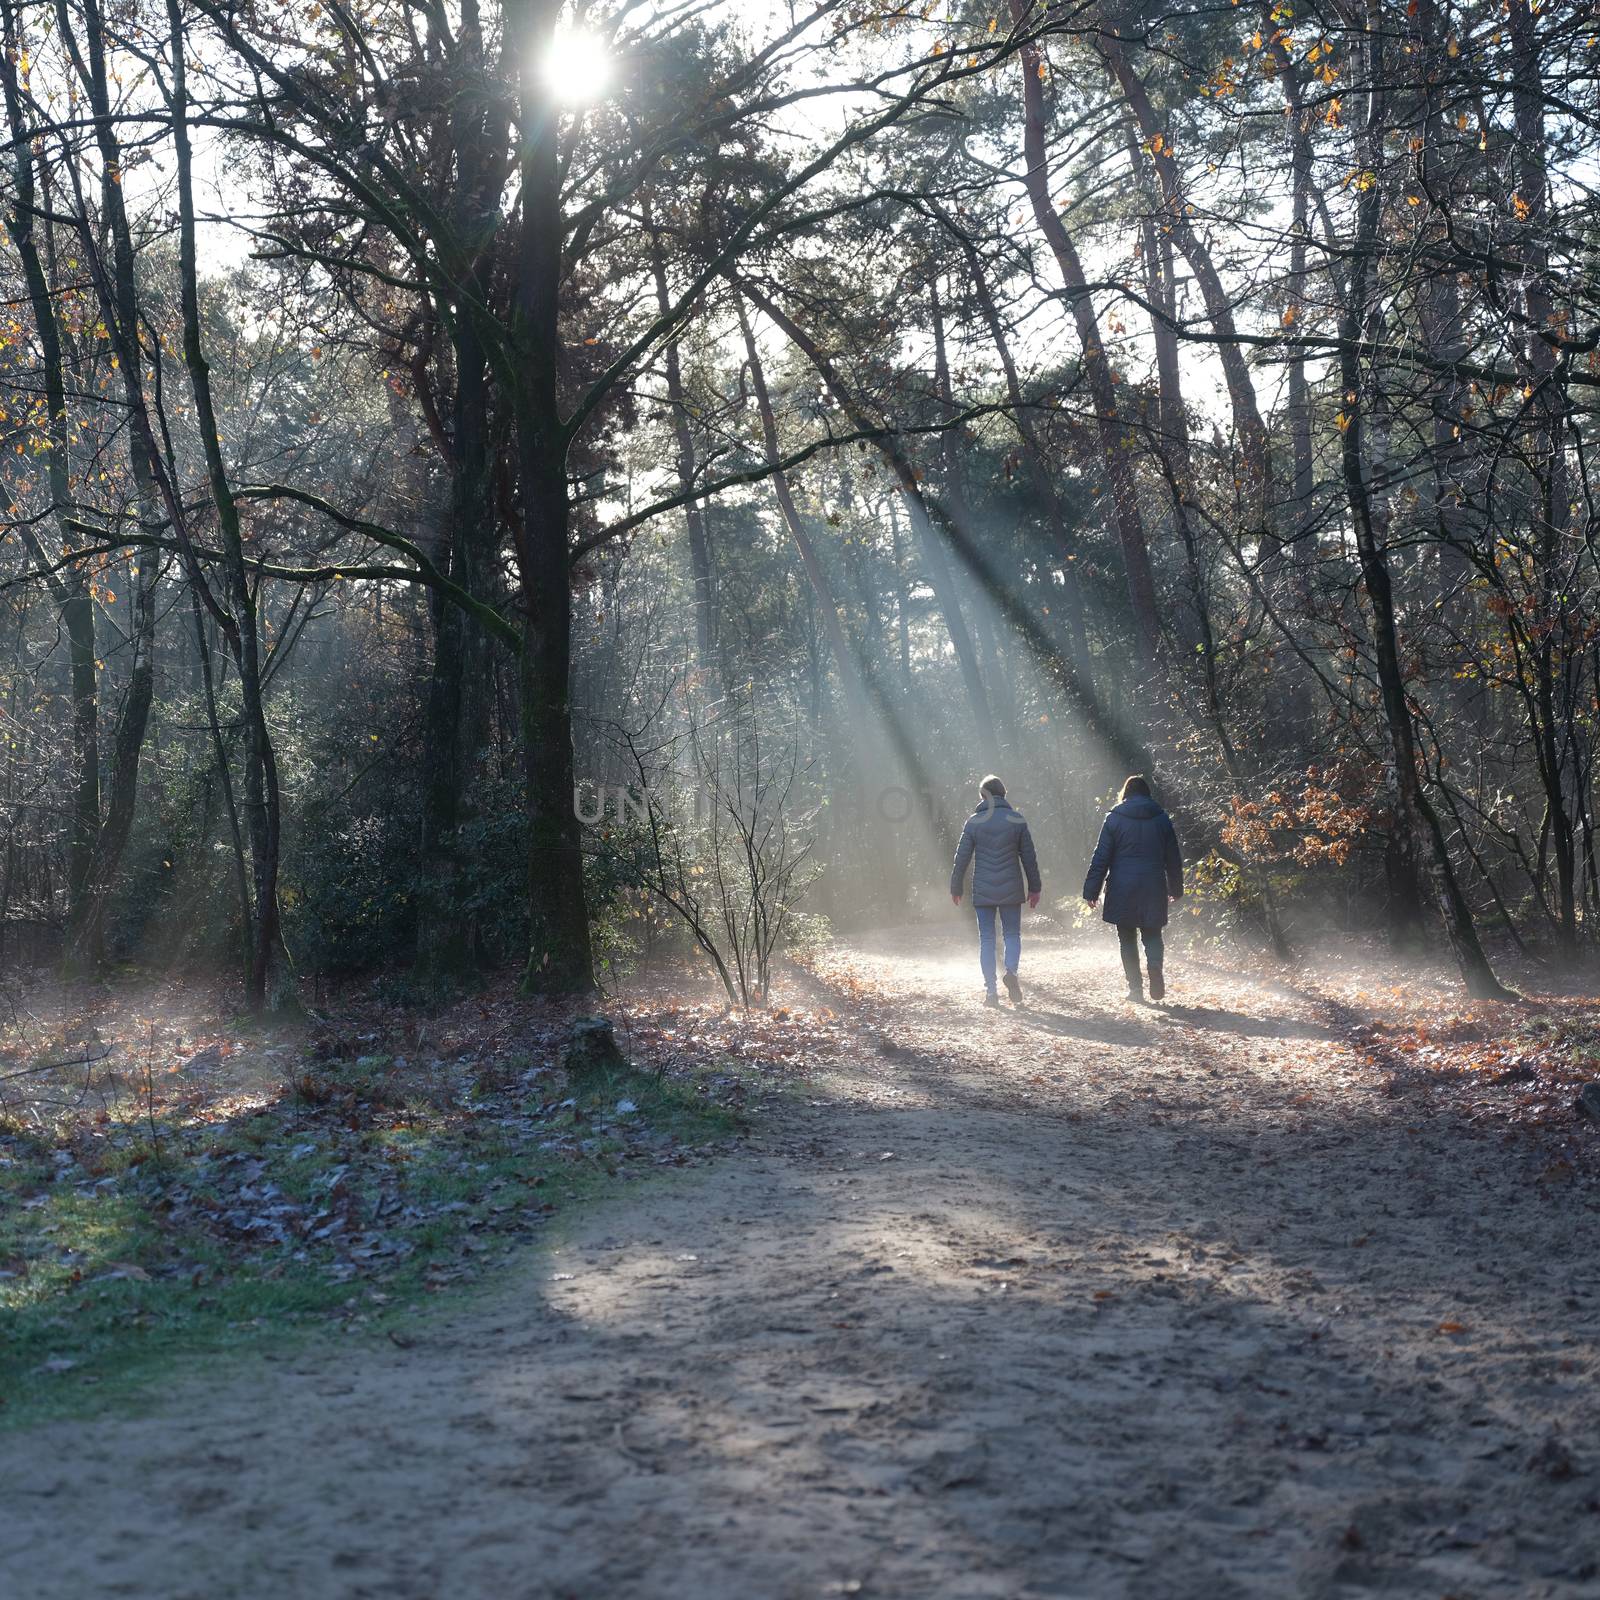 two women walk in autumn forest near doorn and utrecht in the netherlands on sunny day in the fall with fog